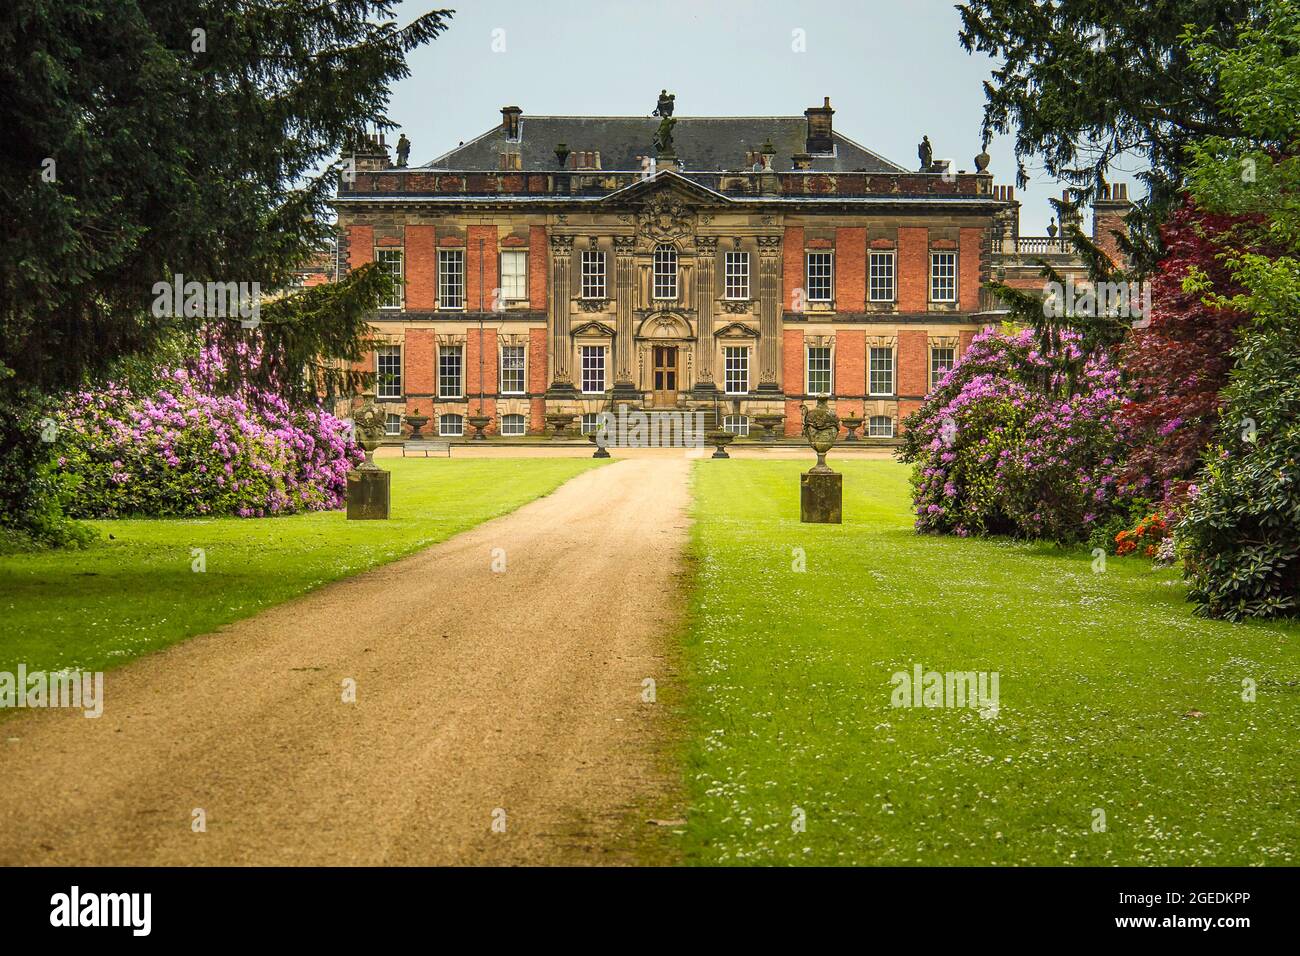 Western façade of Wentworth Woodhouse country house, a Grade 1 listed building, in the village of Wentworth, South Yorkshire, England, UK. Stock Photo